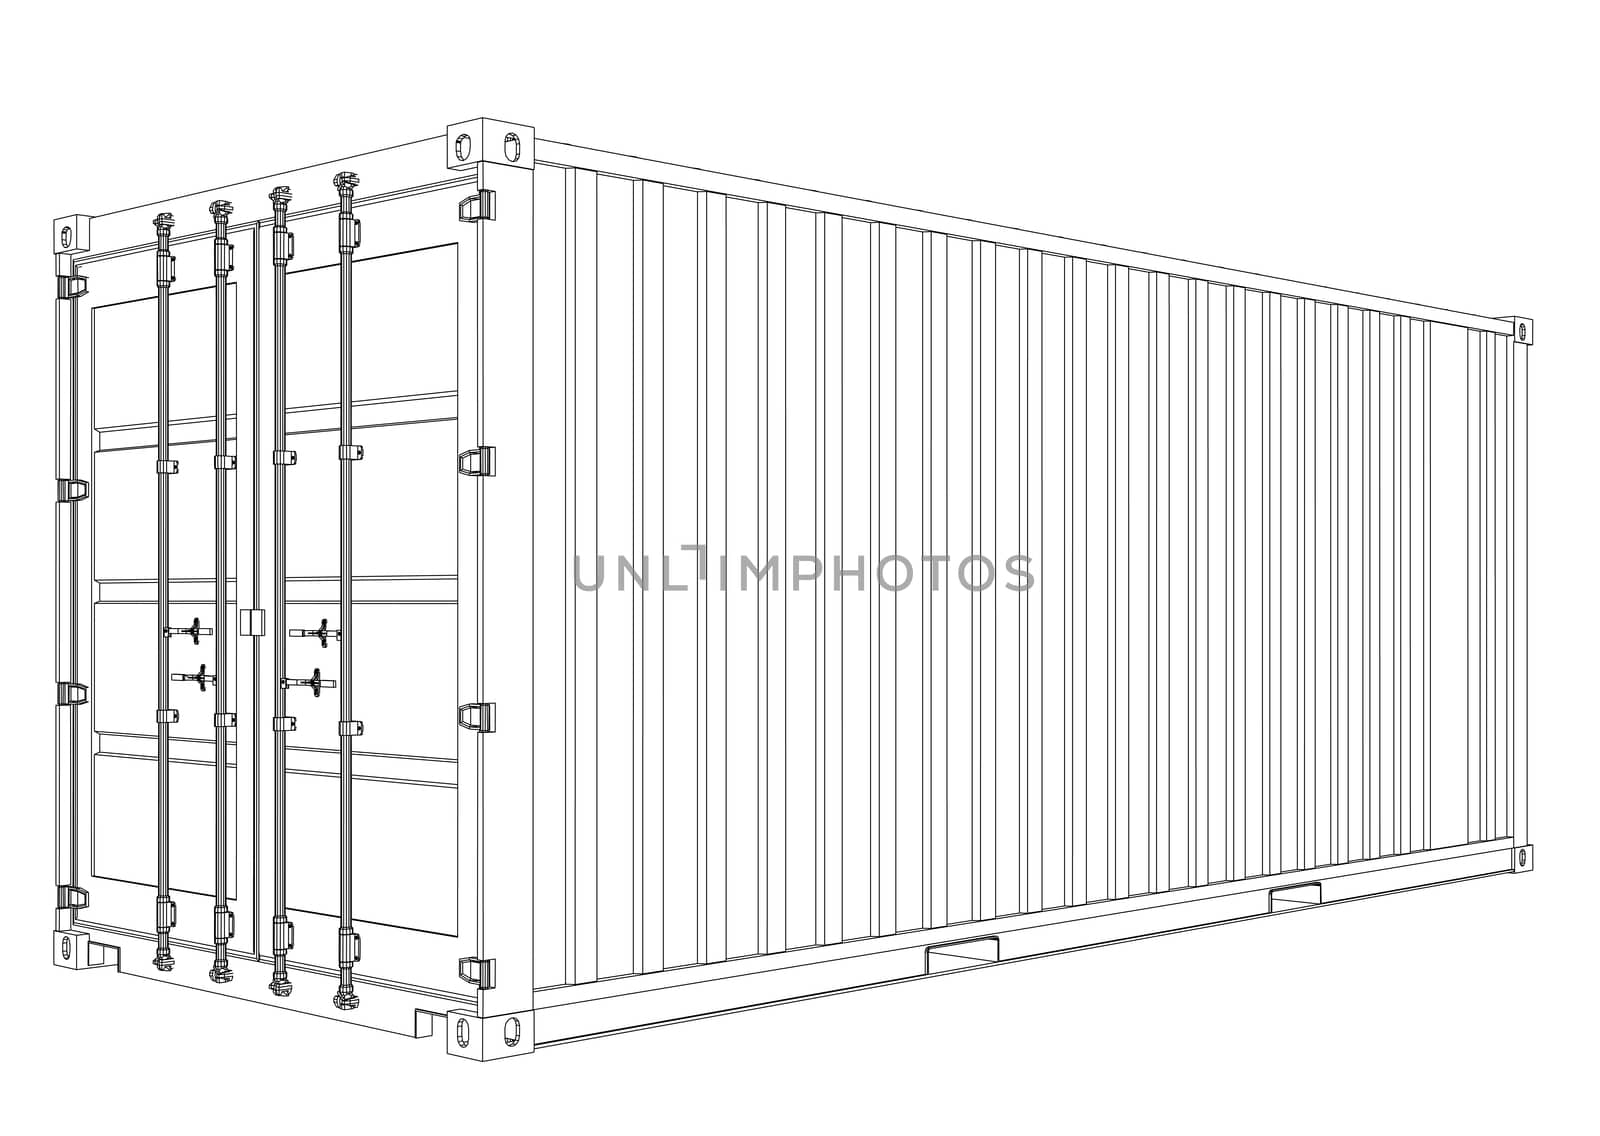 Cargo container. Wire-frame style by cherezoff